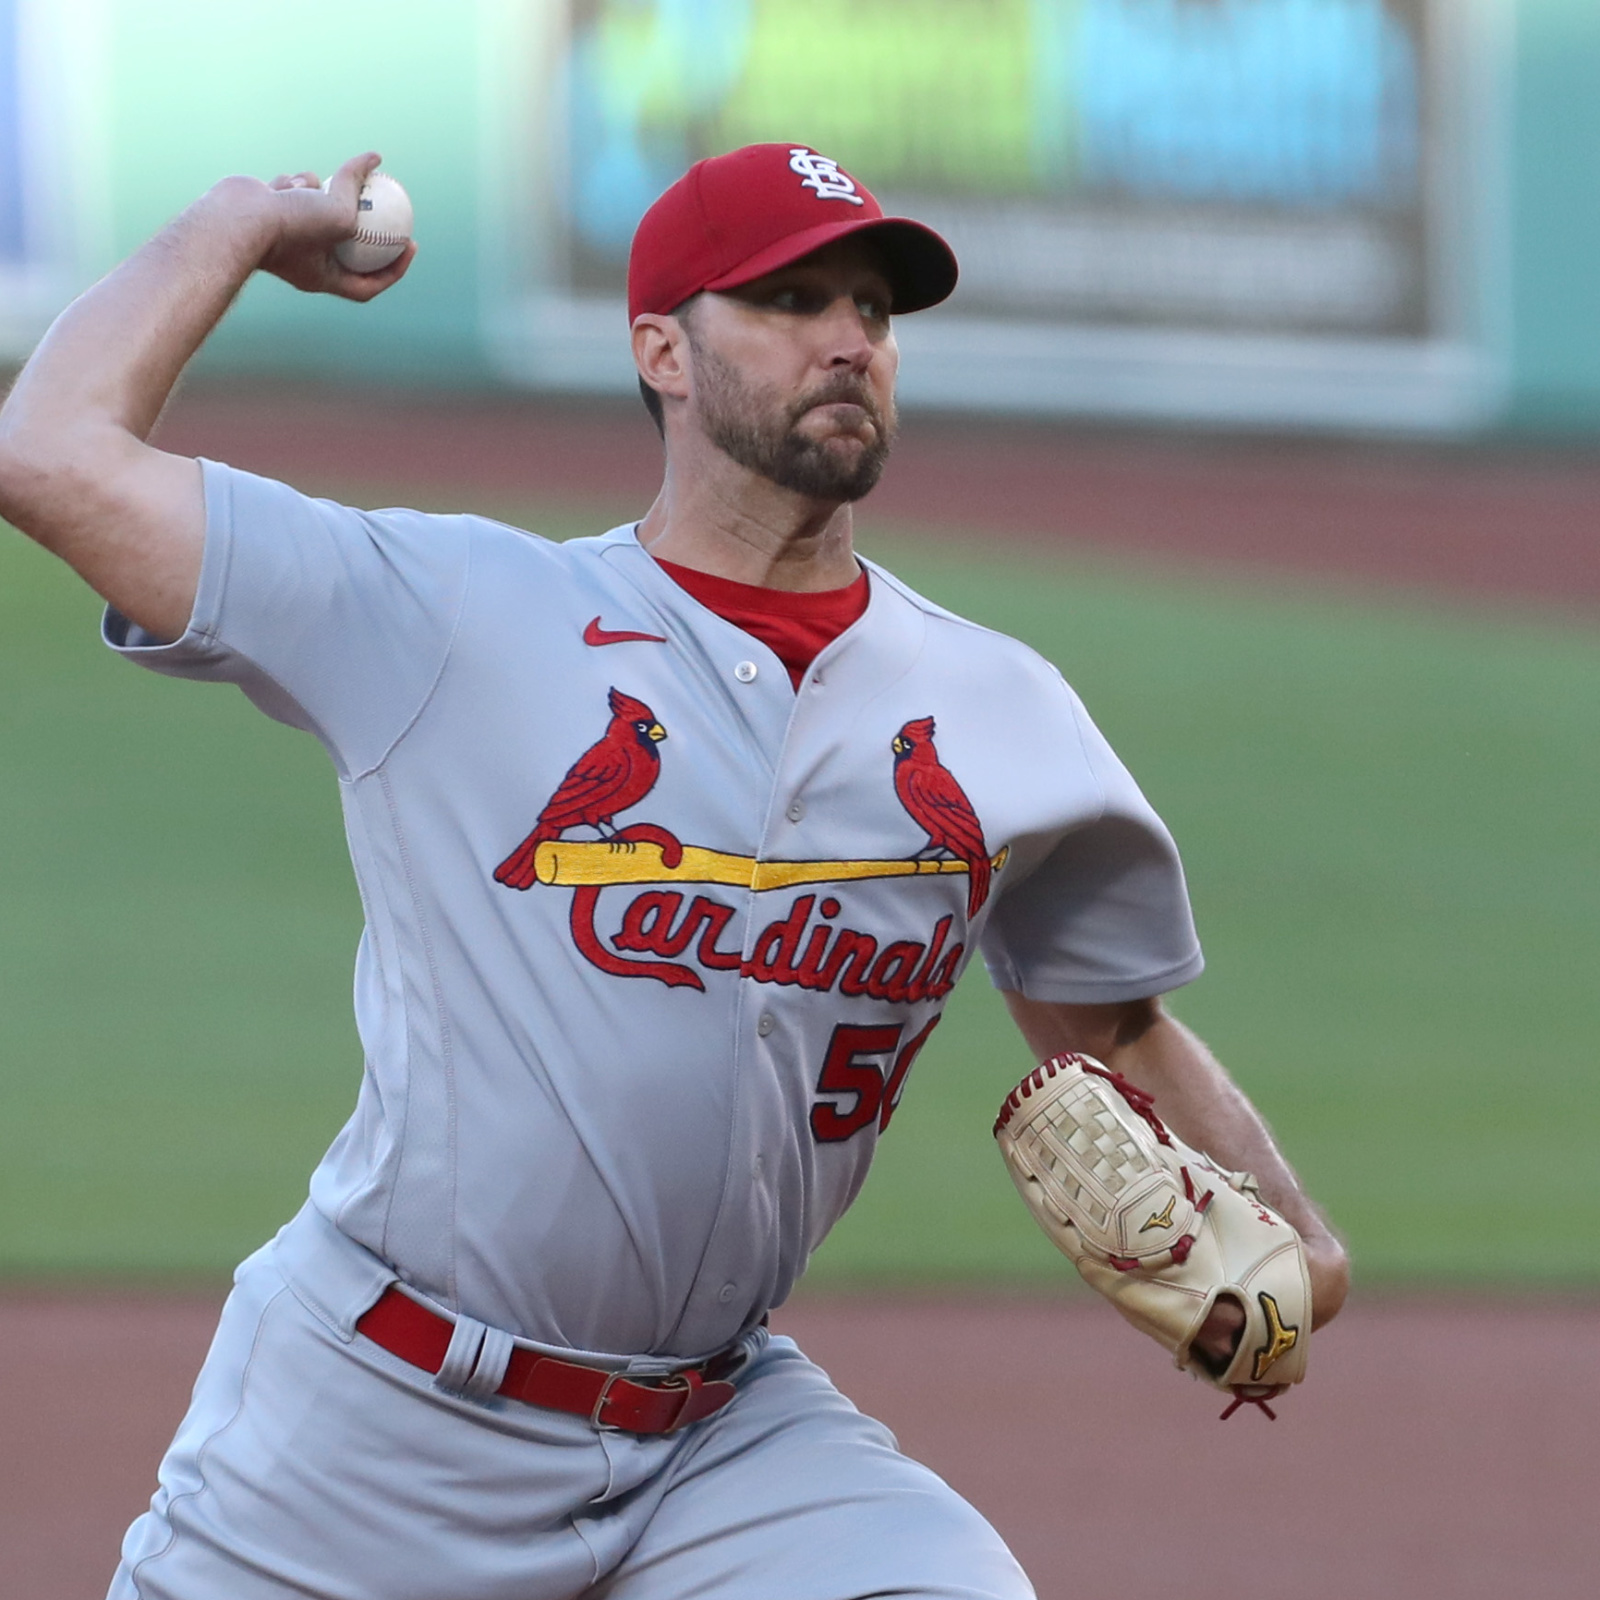 Run it back: Wainwright to return to Cardinals for 2023